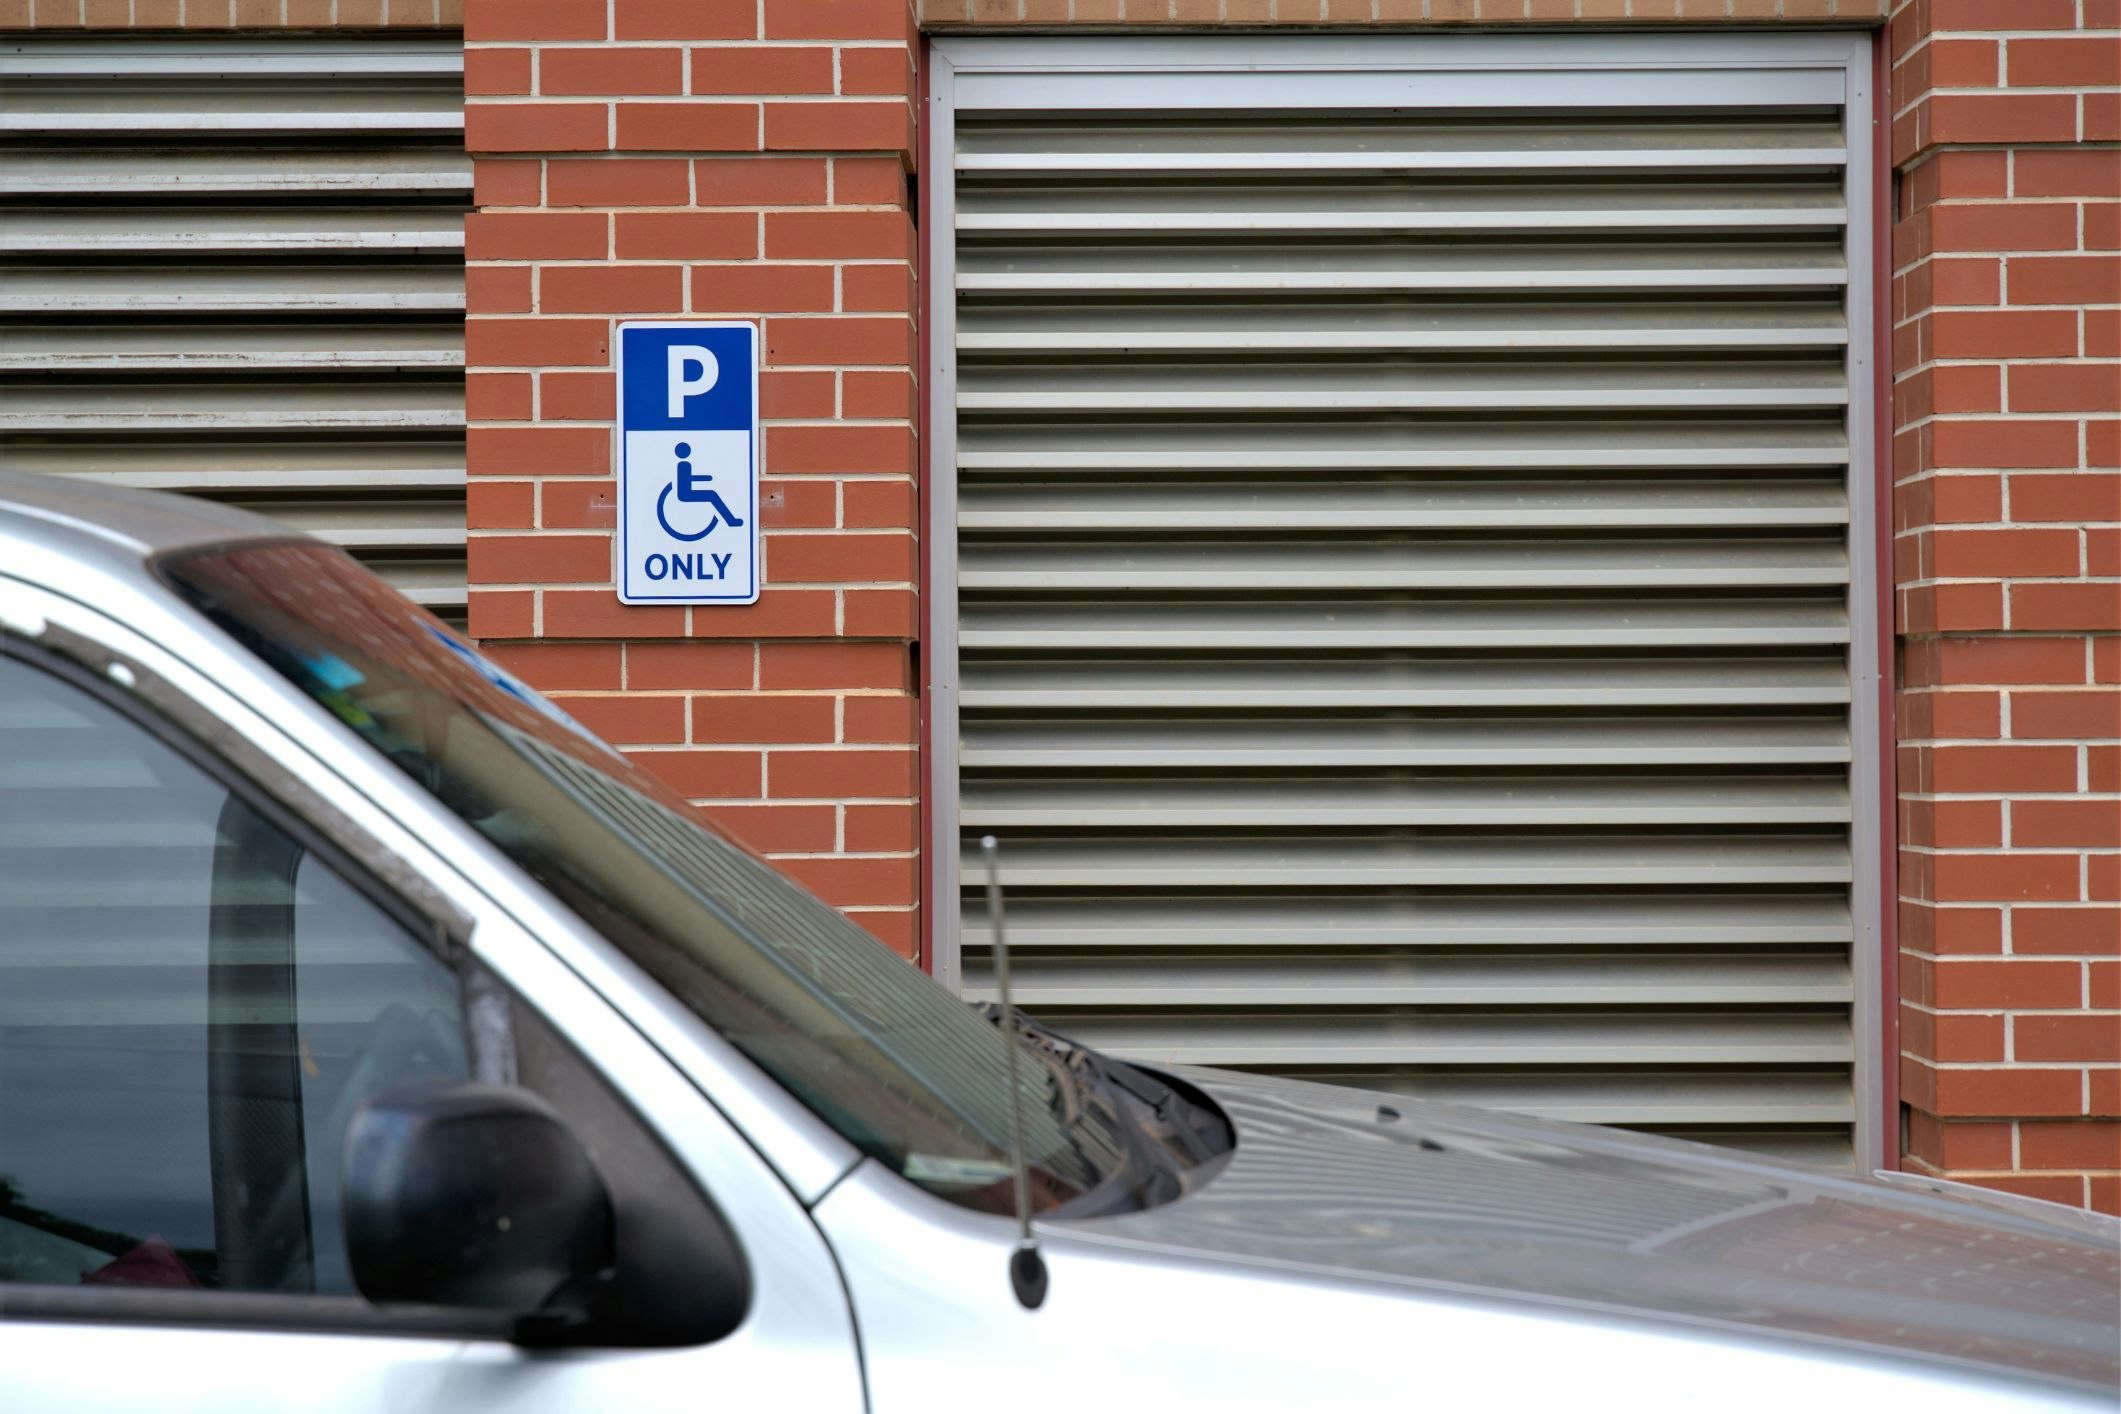 Disability parking space with international parking signage